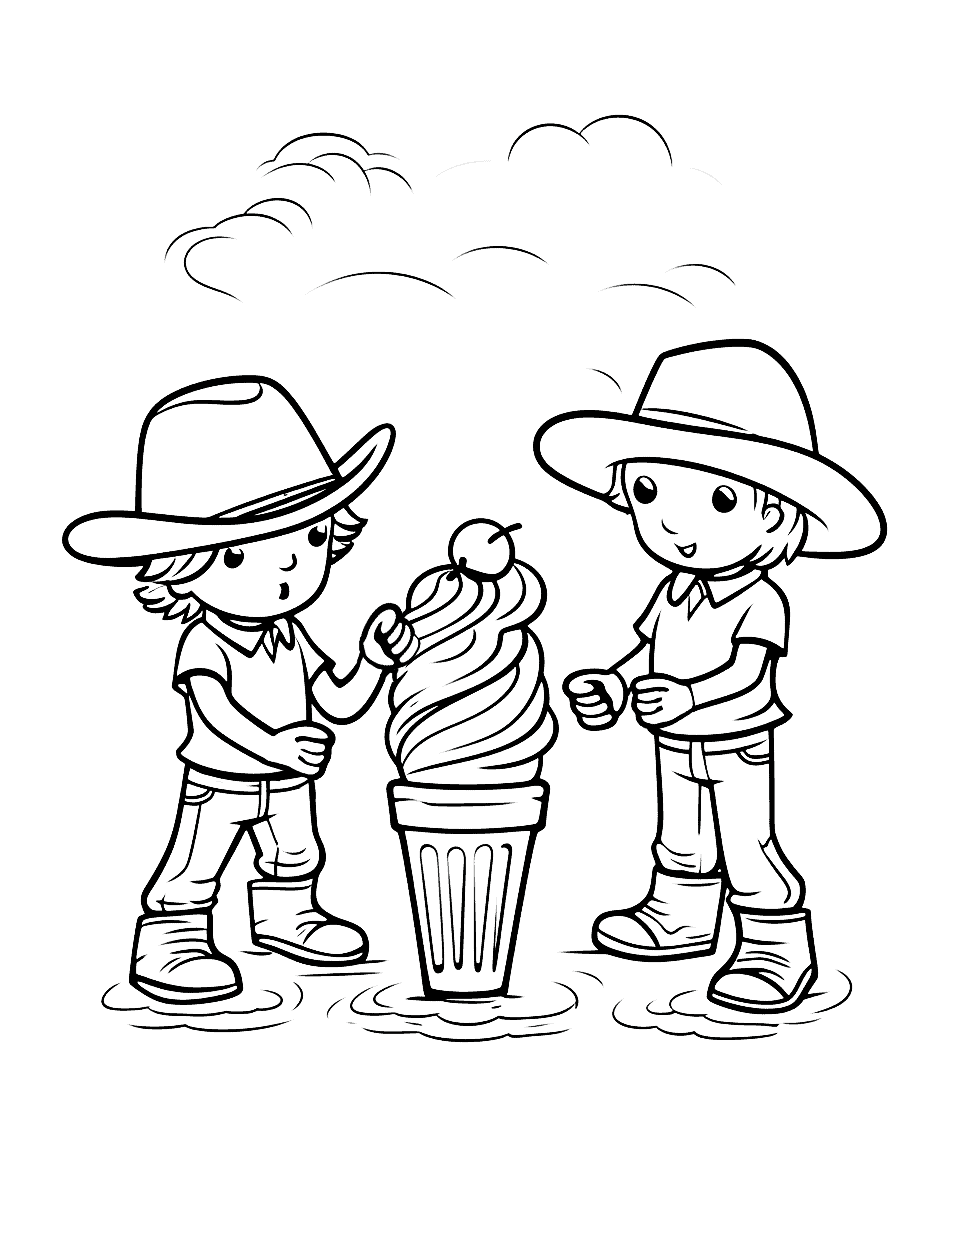 Cowboy Ice Cream Showdown Coloring Page - Cowboys at a fun duel beside a huge ice cream cone.